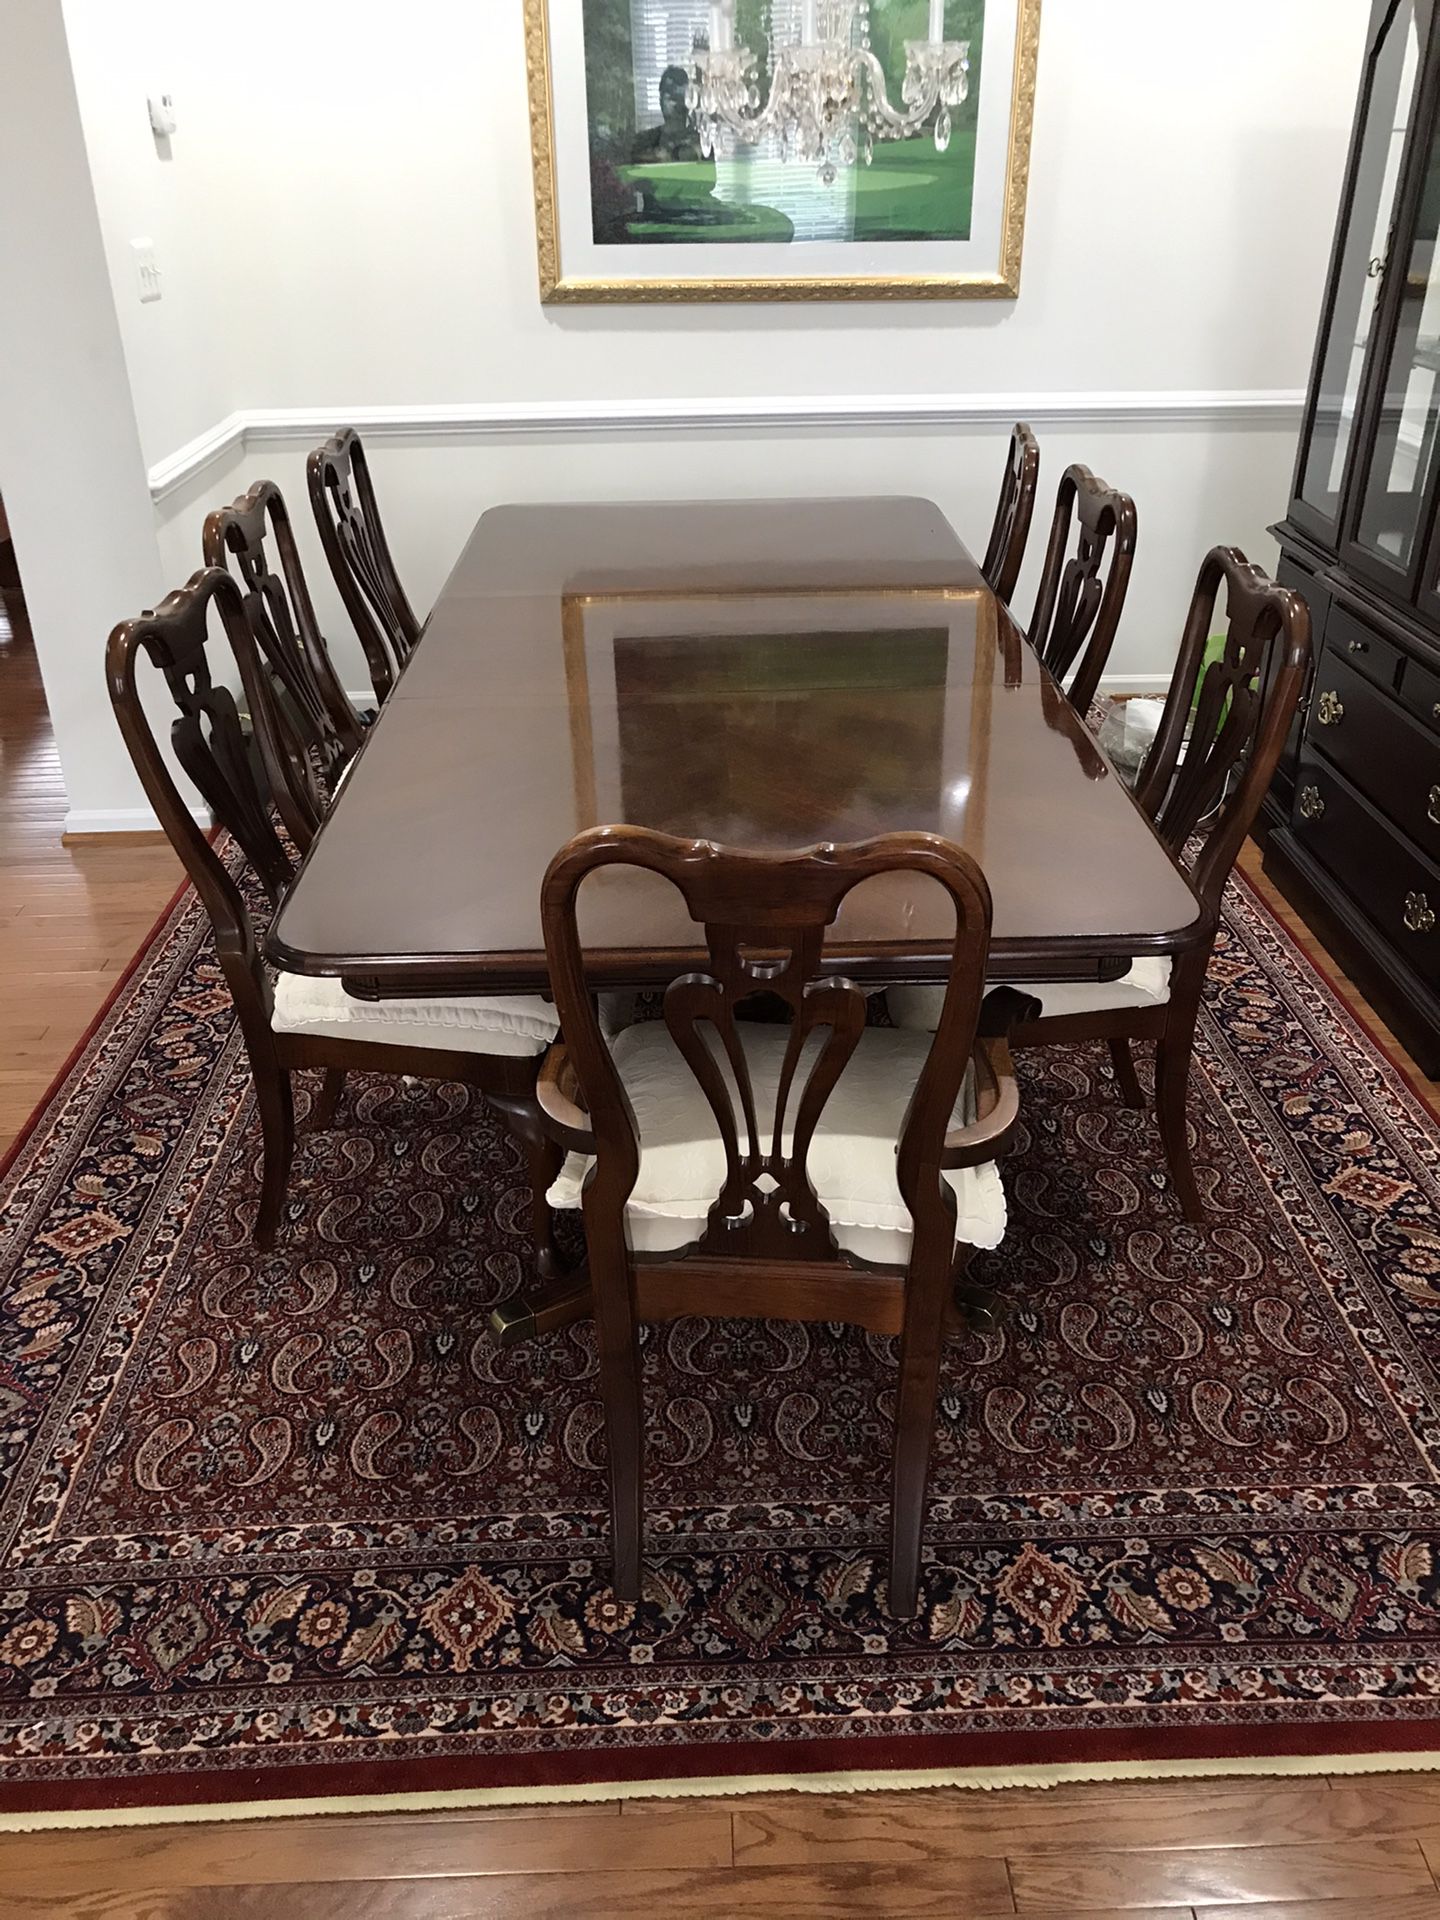 Dinning table with chairs 96”x 44” x 30”